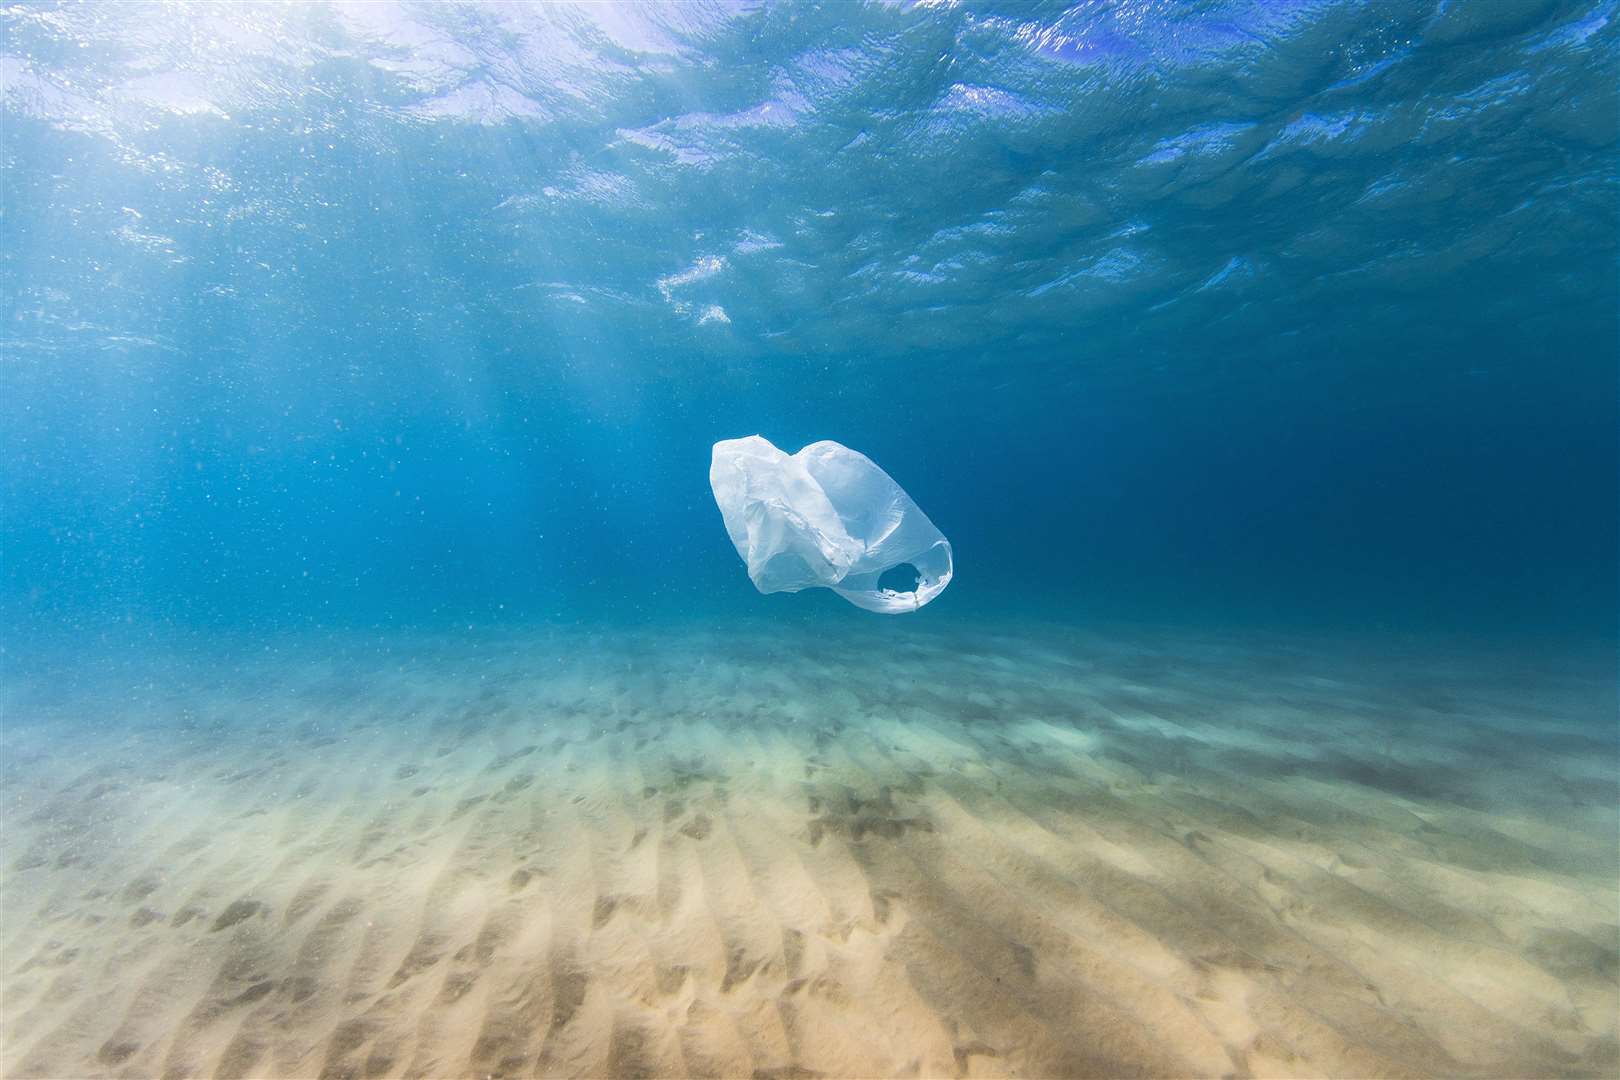 A plastic bag drifts in the clear blue ocean as a result of human pollution